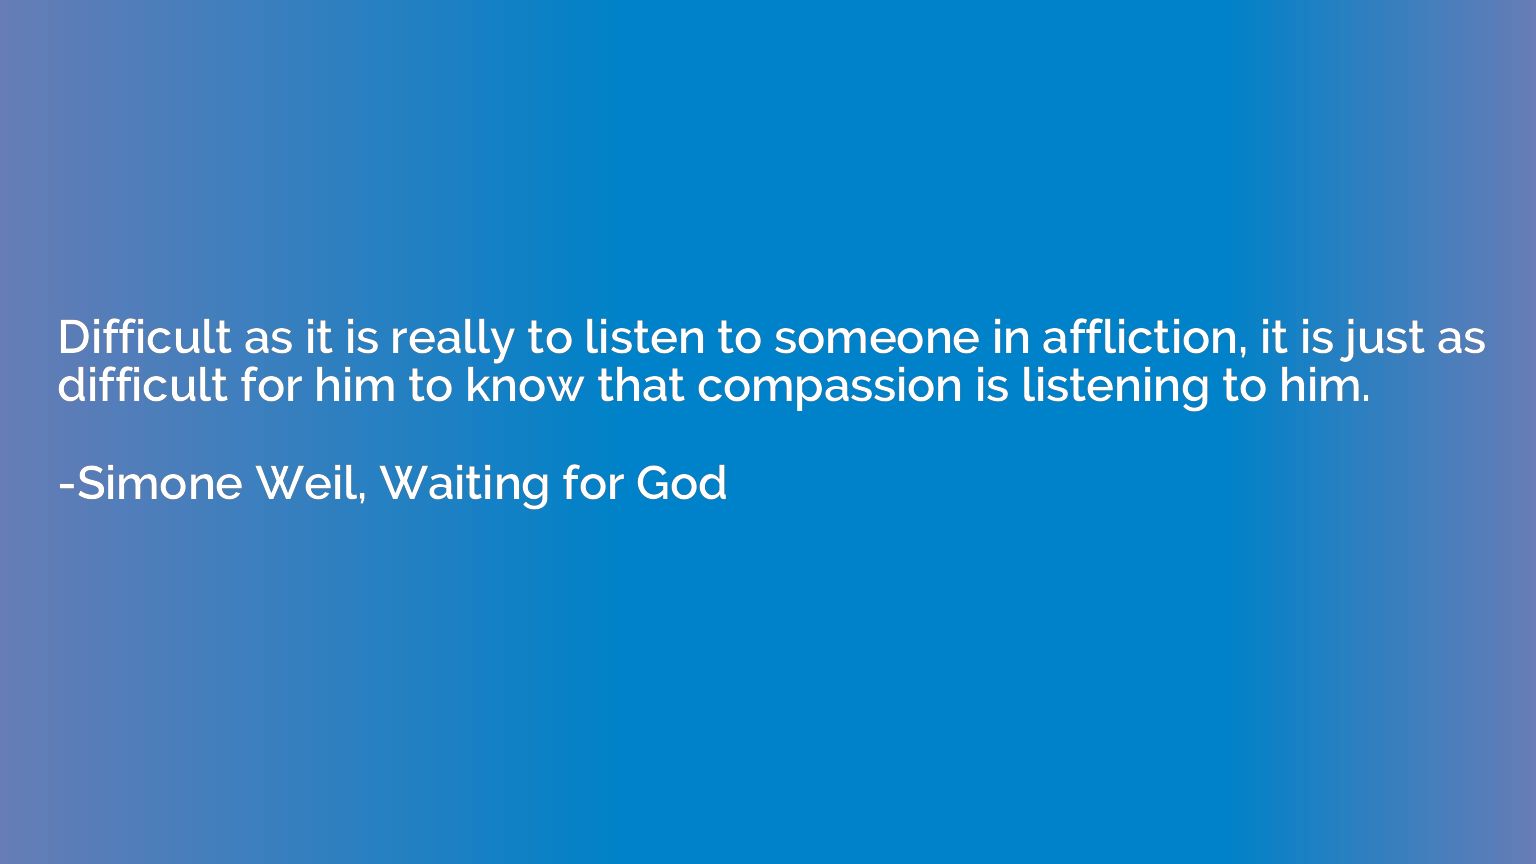 Difficult as it is really to listen to someone in affliction